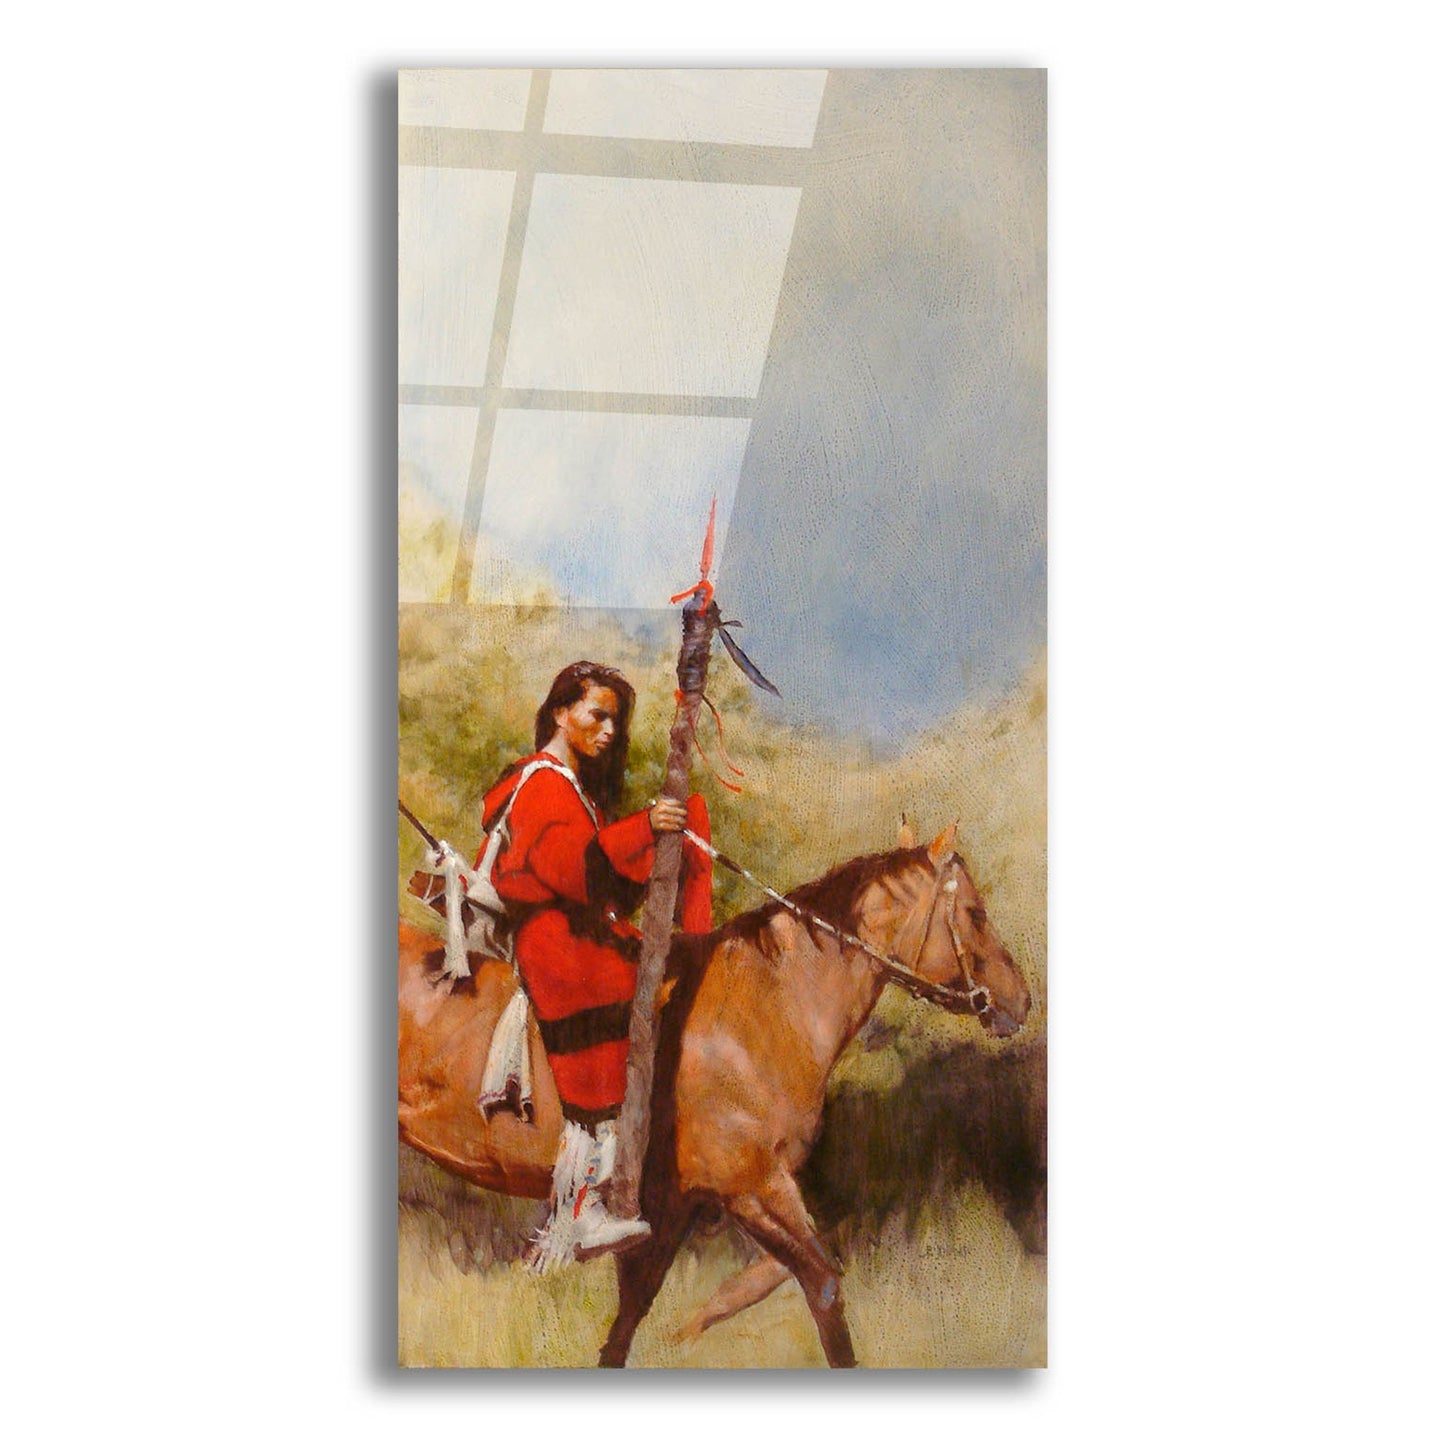 Epic Art 'Horse And Rider At A Walk' by J. E. Knauf, Acrylic Glass Wall Art,12x24